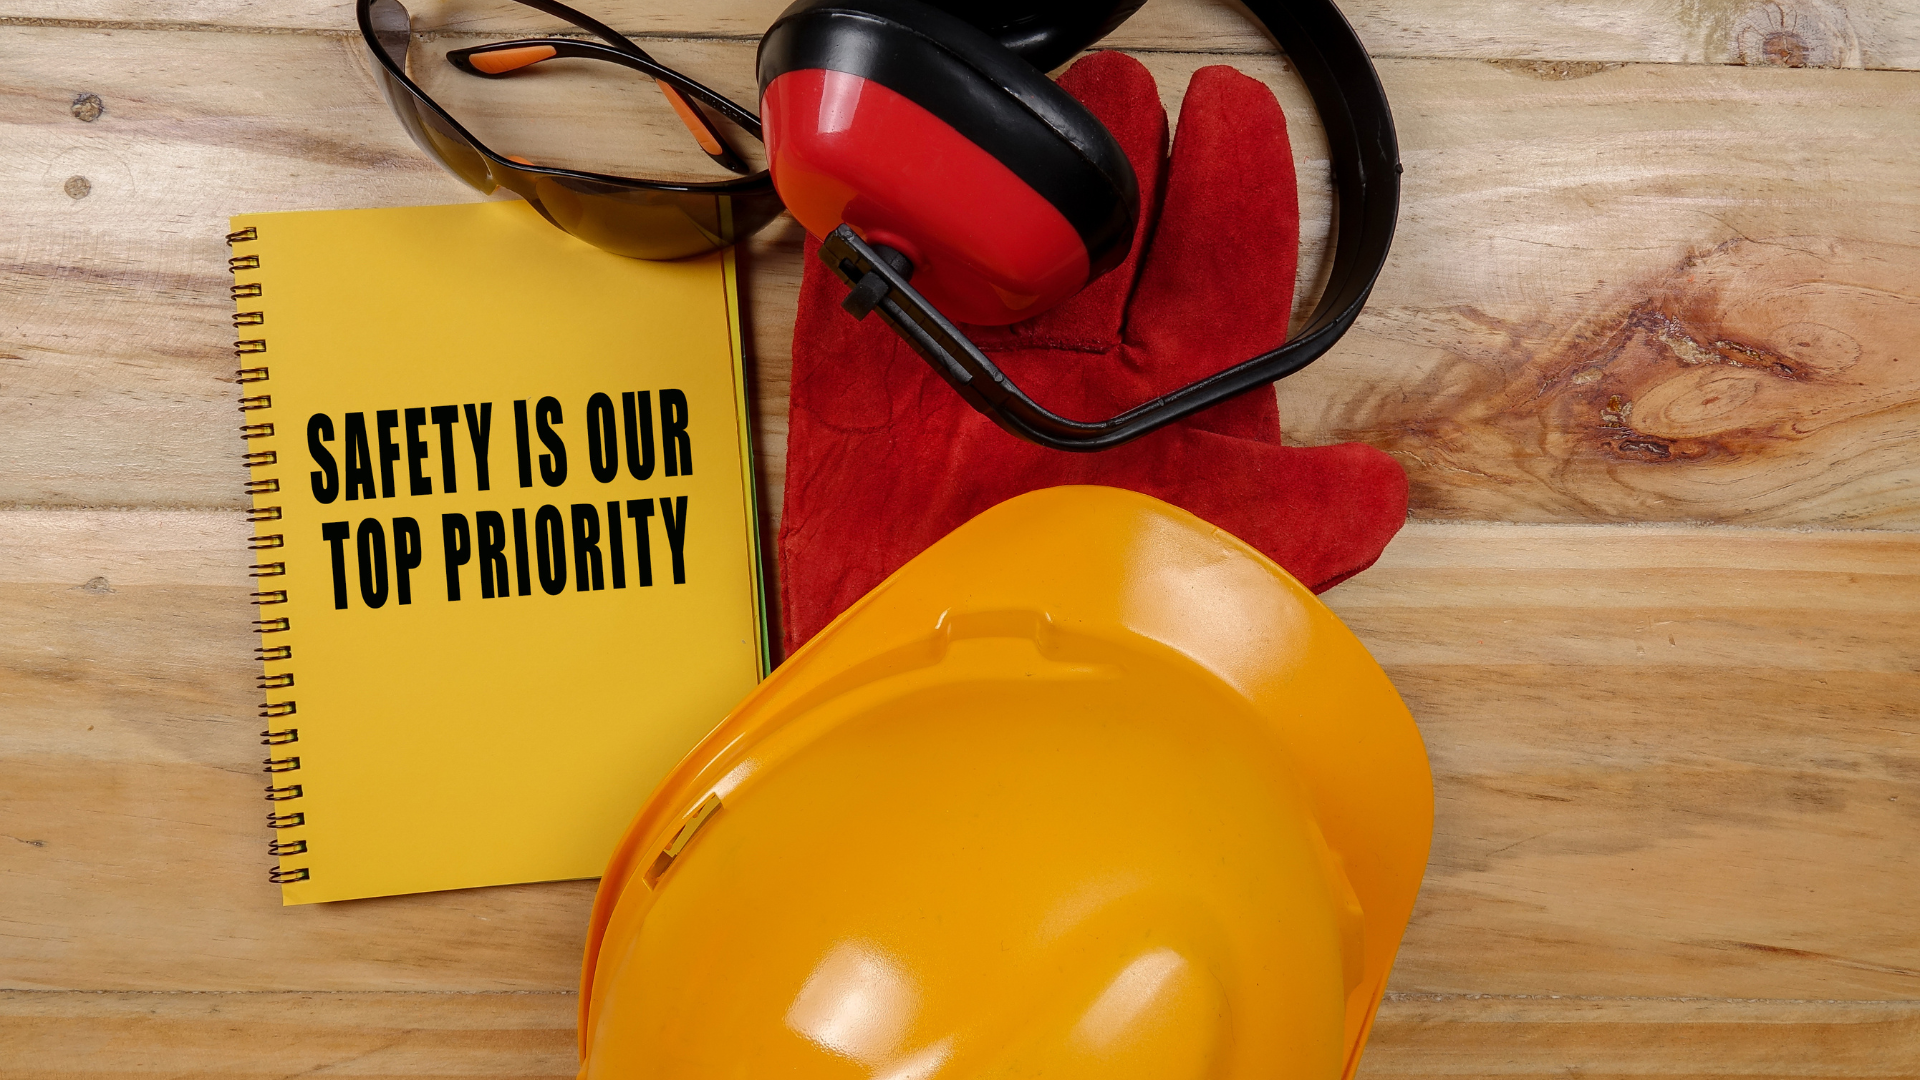 Onsite Services offered by Frequency Hearing making safety a priority for any company